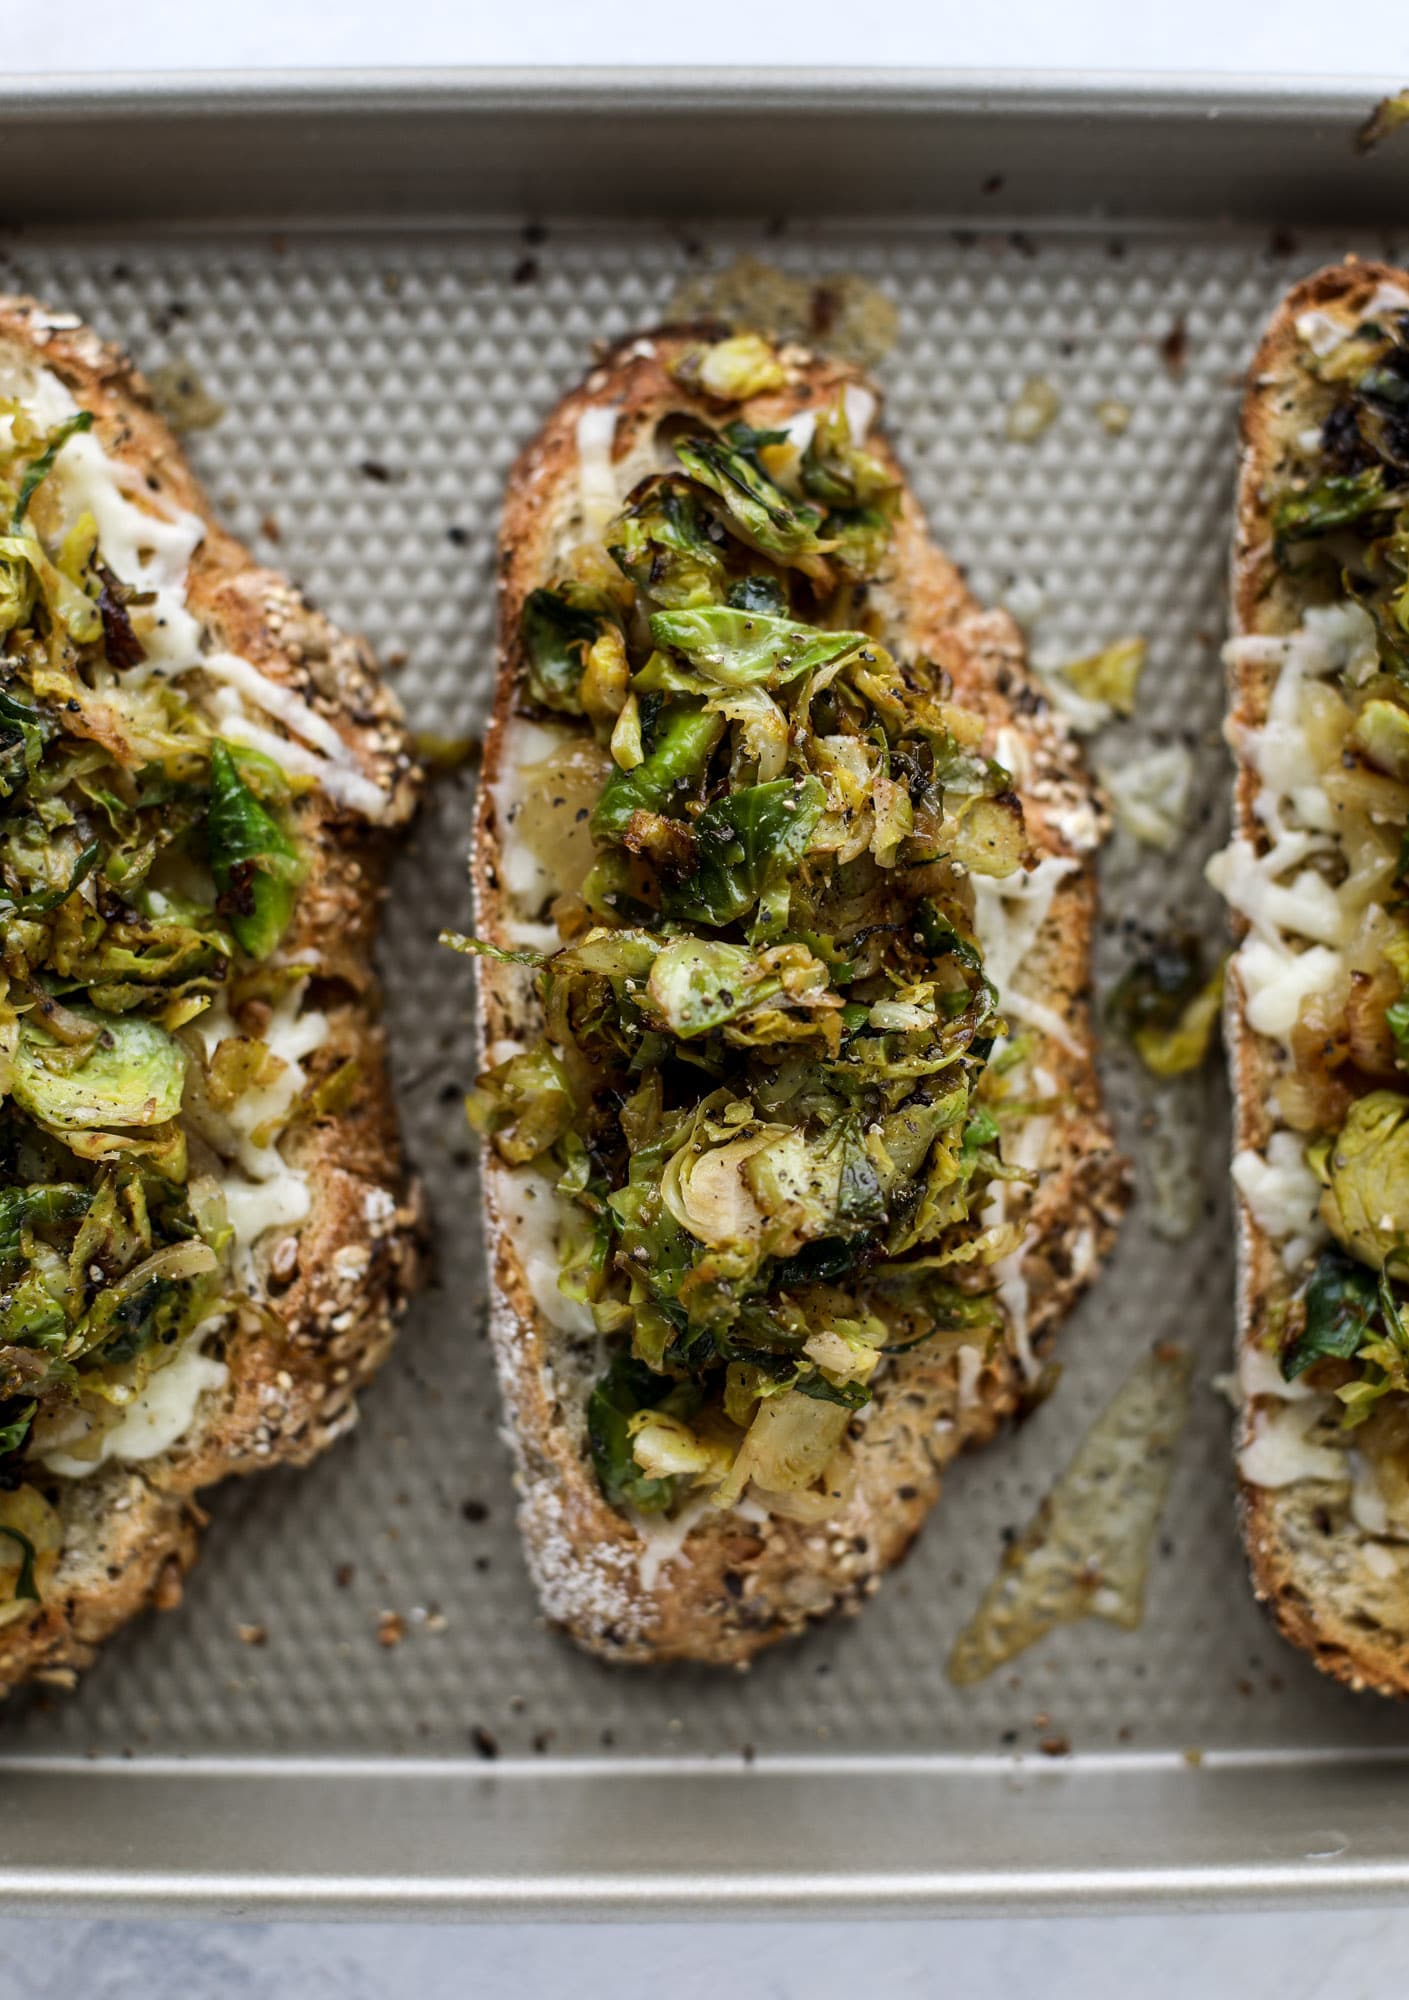 Crispy brussels sprouts toast begins with sourdough bread, melty havarti cheese and caramelized onions. It's high-maintenance toast in the best way possible. I howsweeteats.com